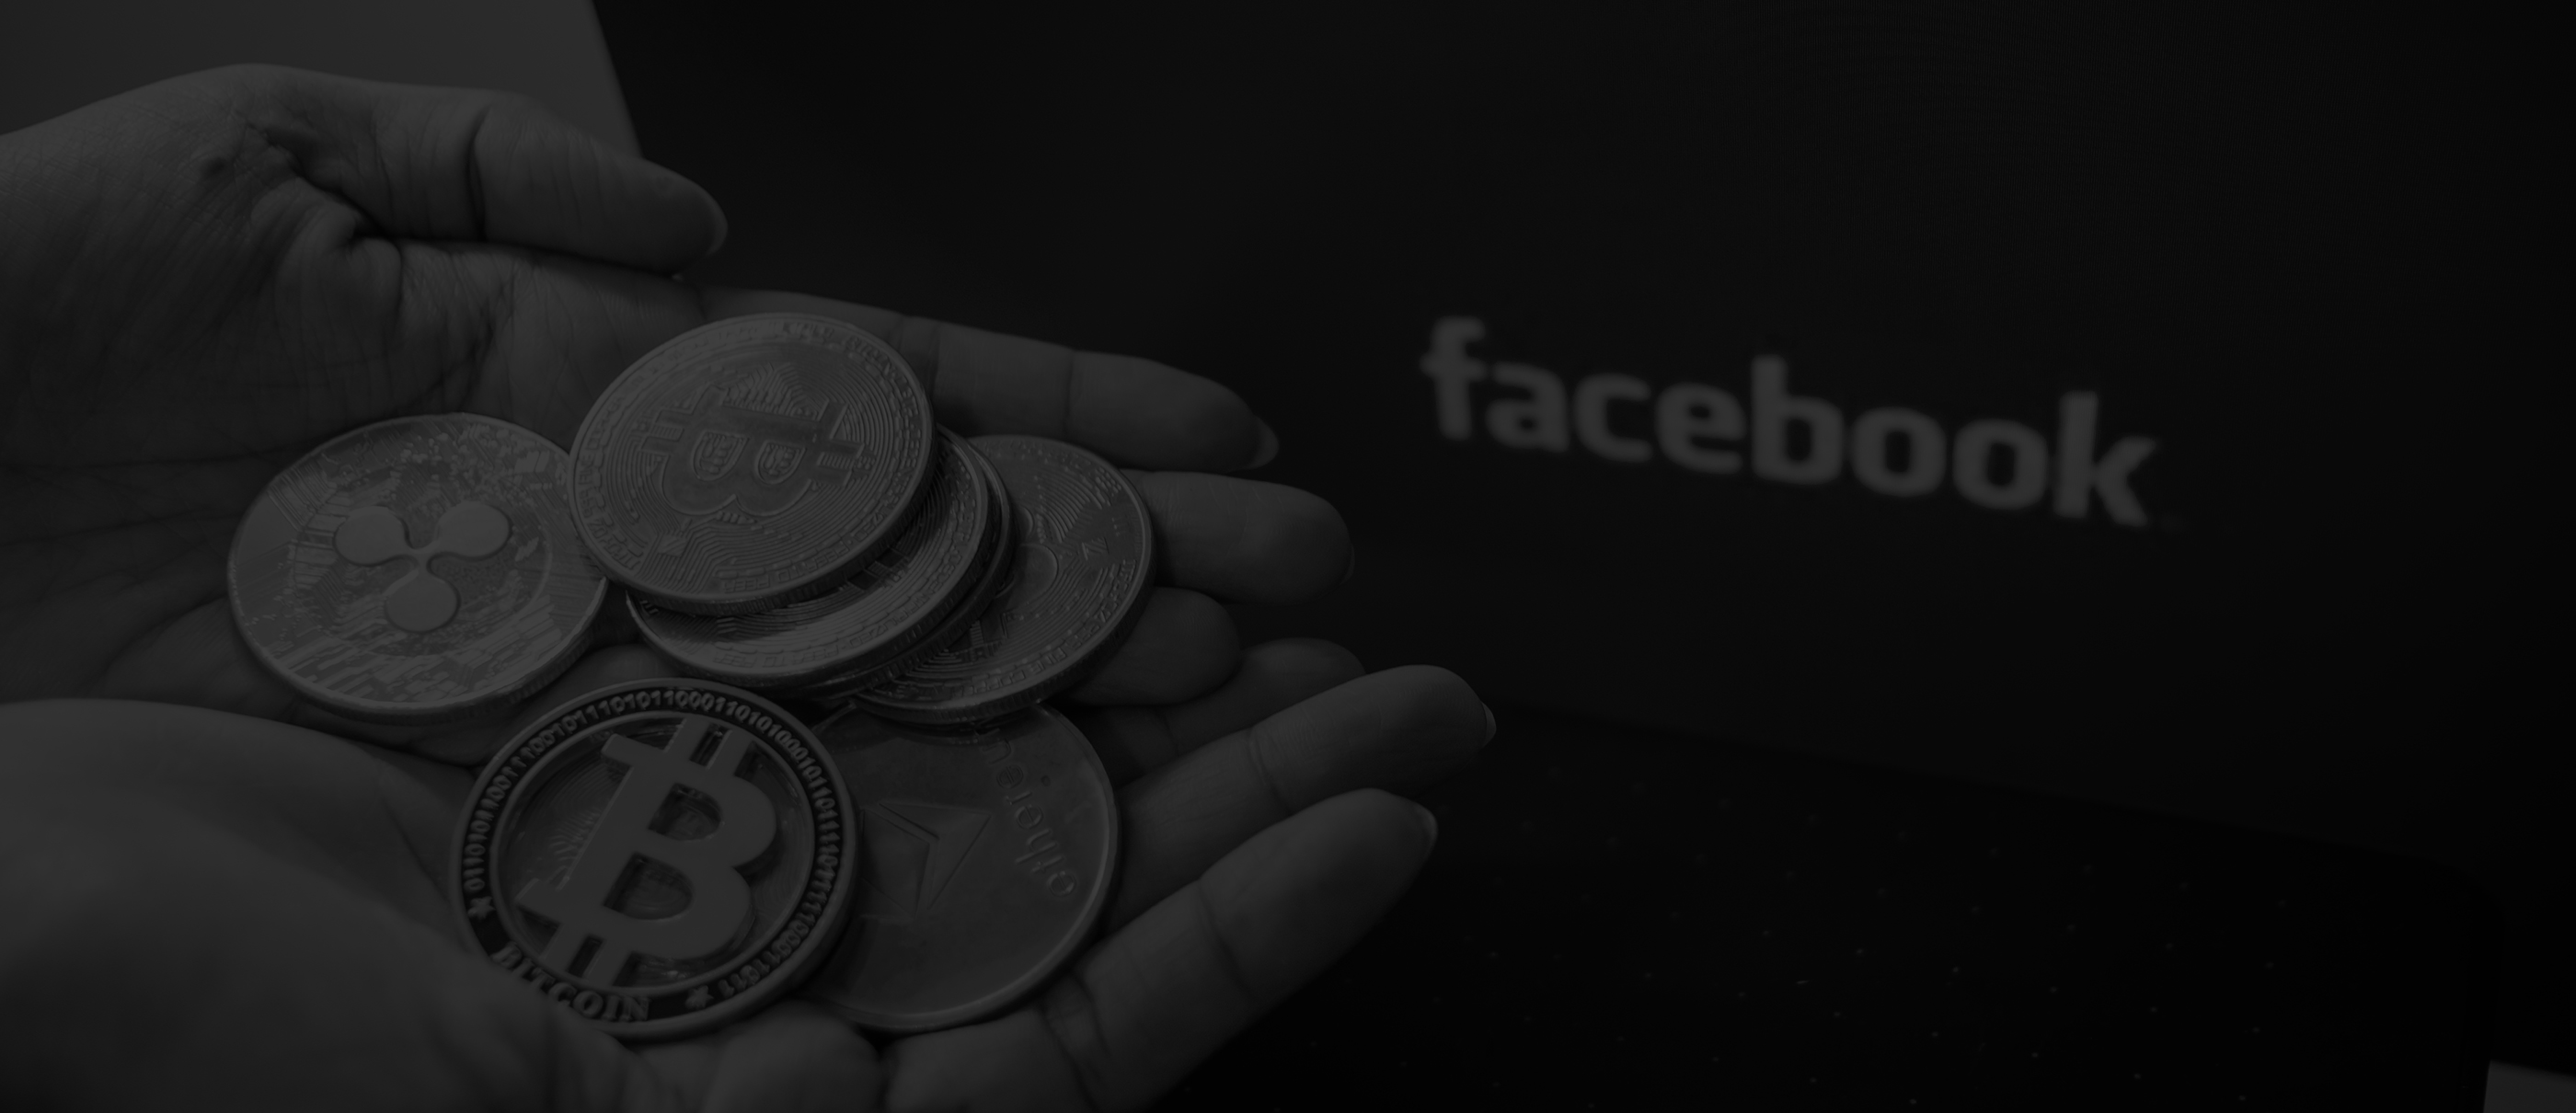 Kaleida: Facebook’s New Libra Currency – What Could Go Wrong? Banner